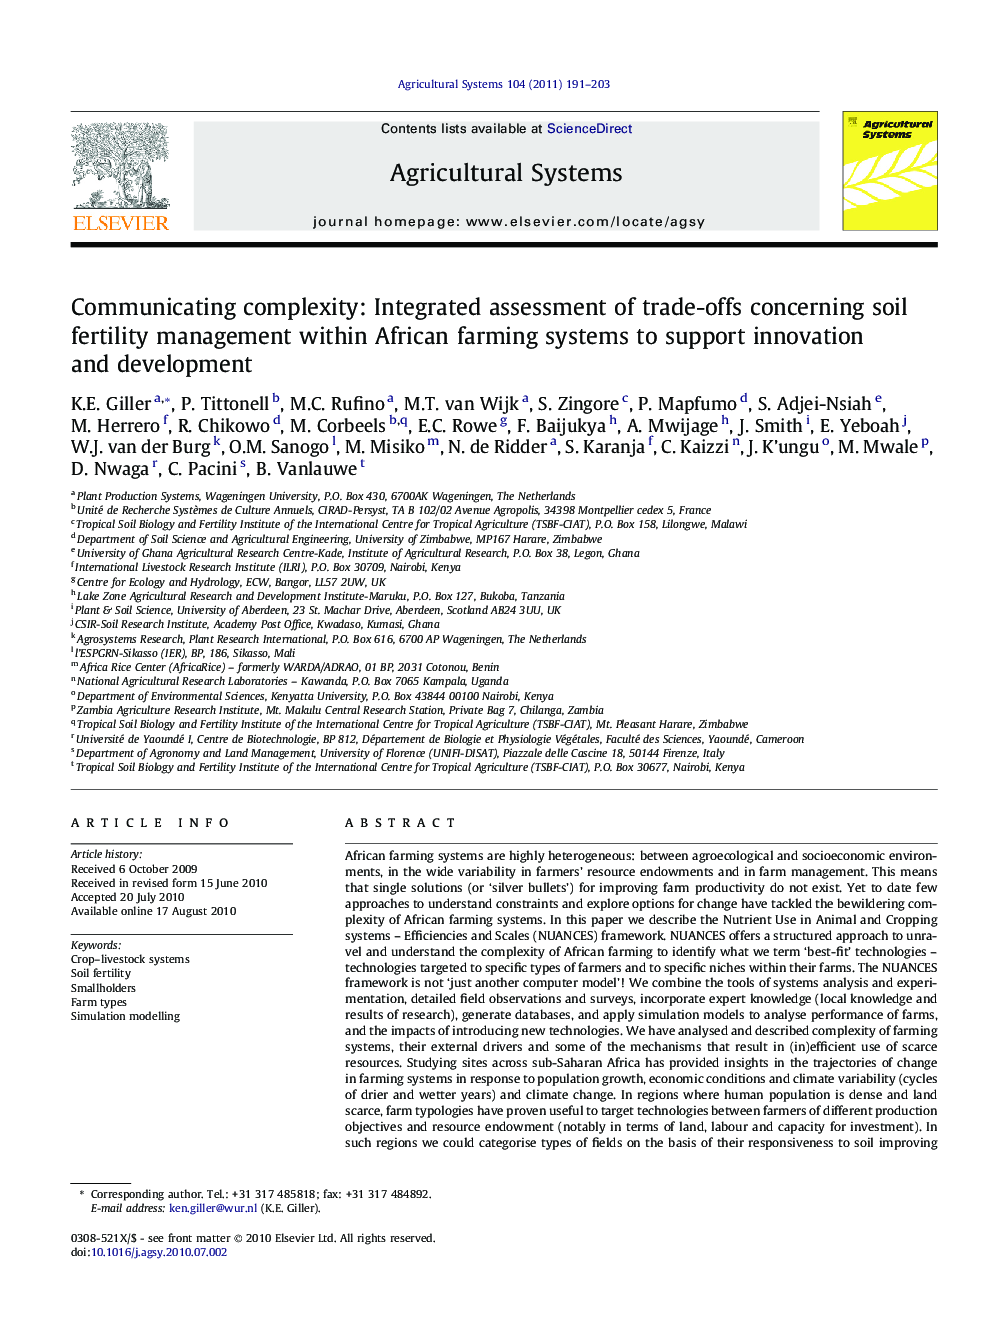 Communicating complexity: Integrated assessment of trade-offs concerning soil fertility management within African farming systems to support innovation and development